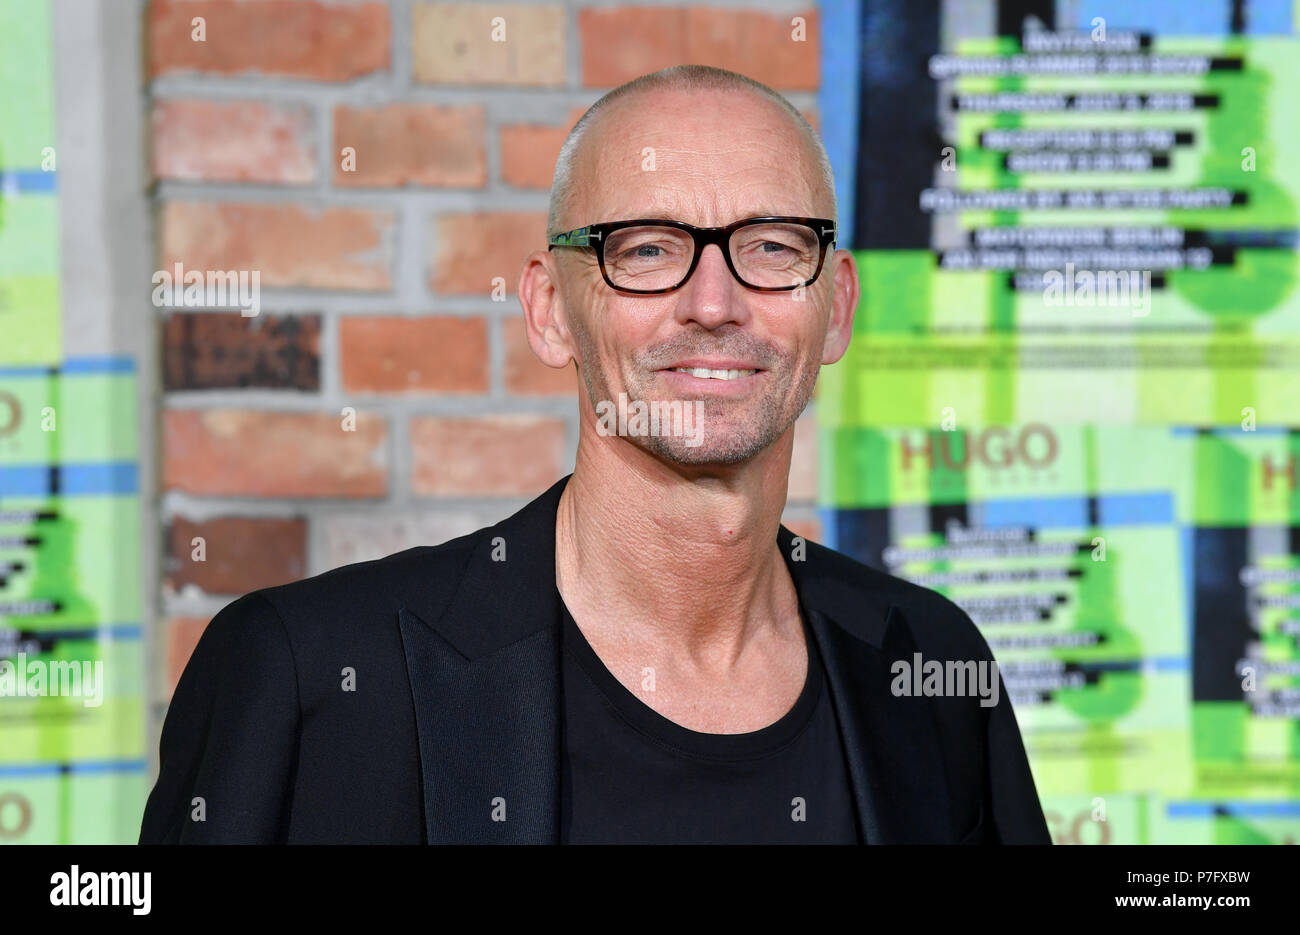 Berlin, Germany. 05th July, 2018. Ingo Wilts, Chief Brand Officer at HUGO  BOSS, arrives for the presentation of the HUGO mens and womens  Spring/Summer 2019 collection at the Motorwerk Weissensee. The Spring/Summer